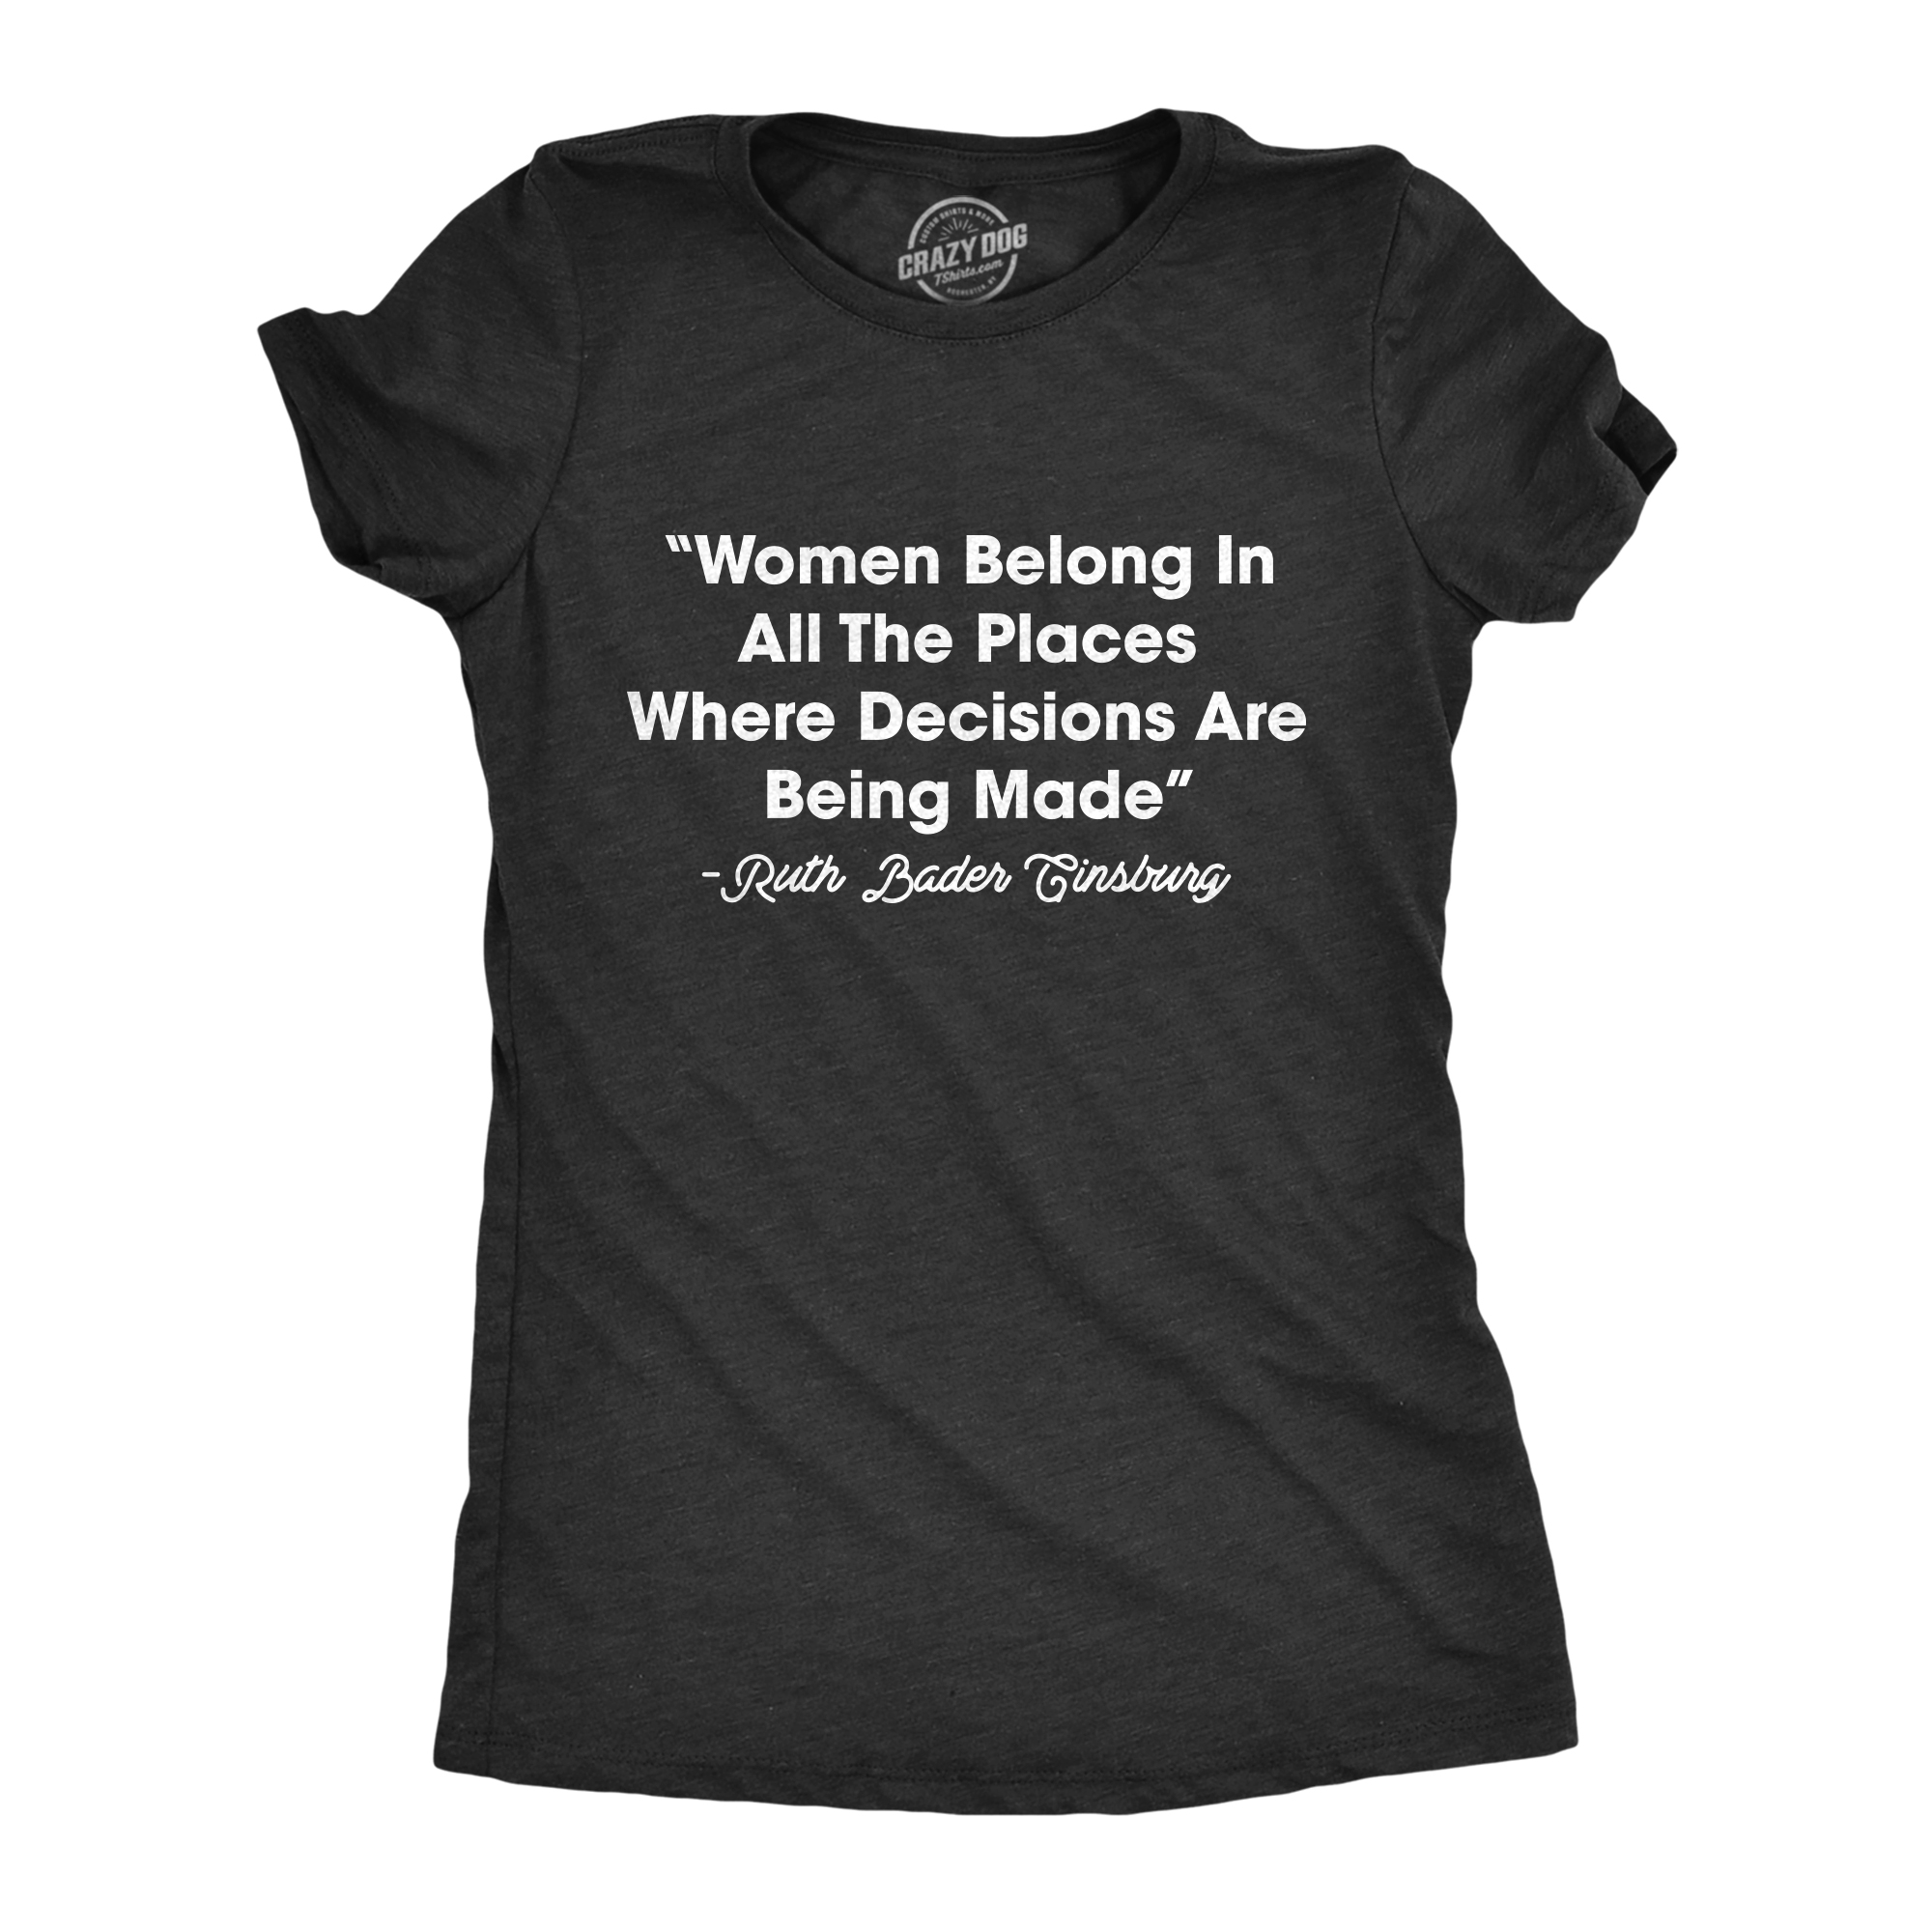 Womens Women Belong In All The Places Where Decisions Are Made Tshirt RBG Ruth Bader Ginsburg Quote Womens Graphic Tees - image 1 of 9